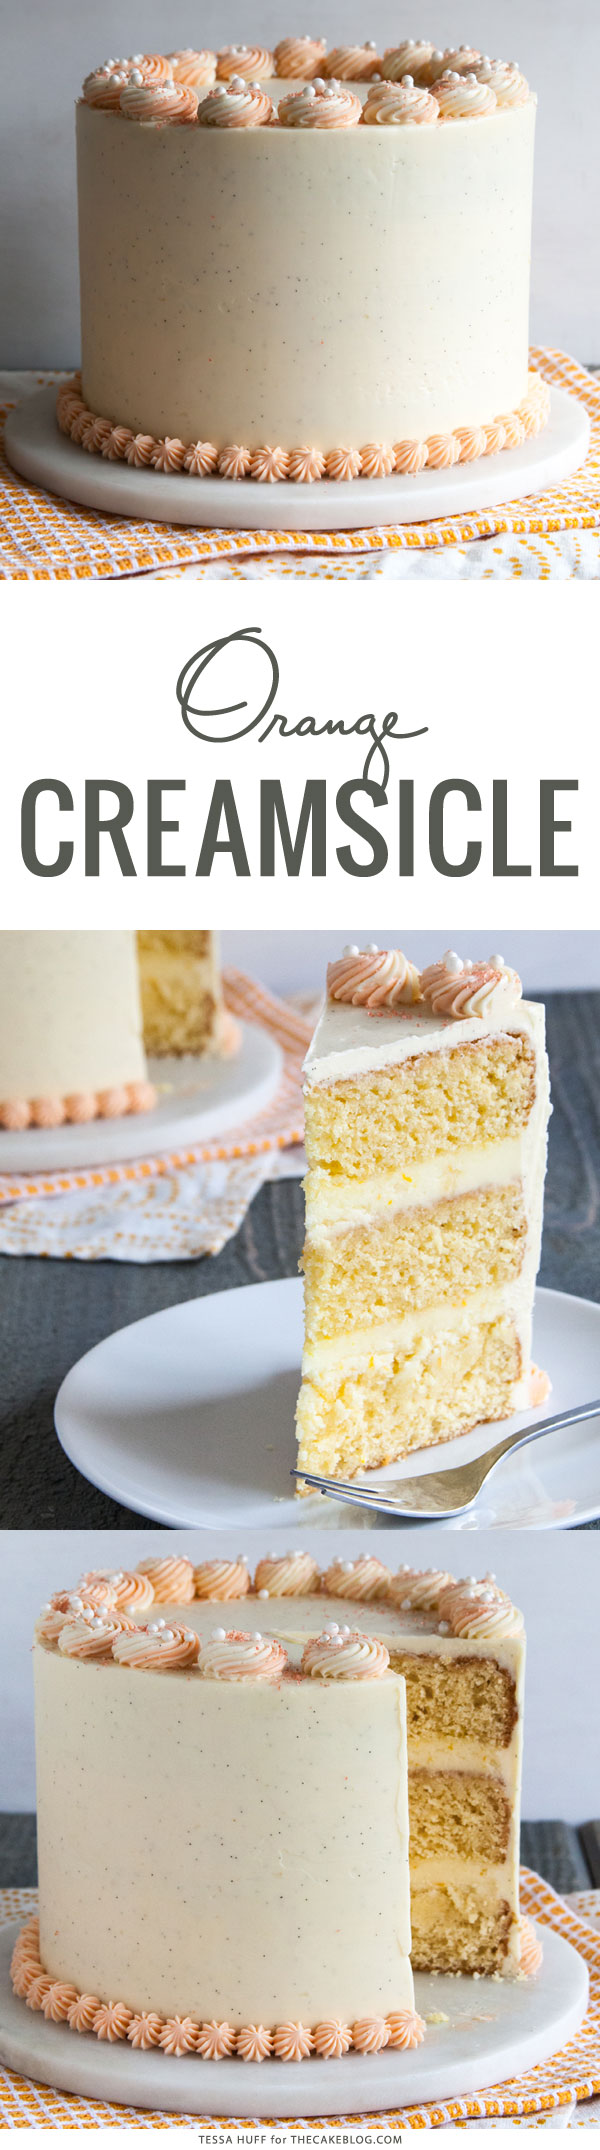 Orange Creamsicle Cake, made from scratch with no orange gelatin or instant pudding | by Tessa Huff for TheCakeBlog.com